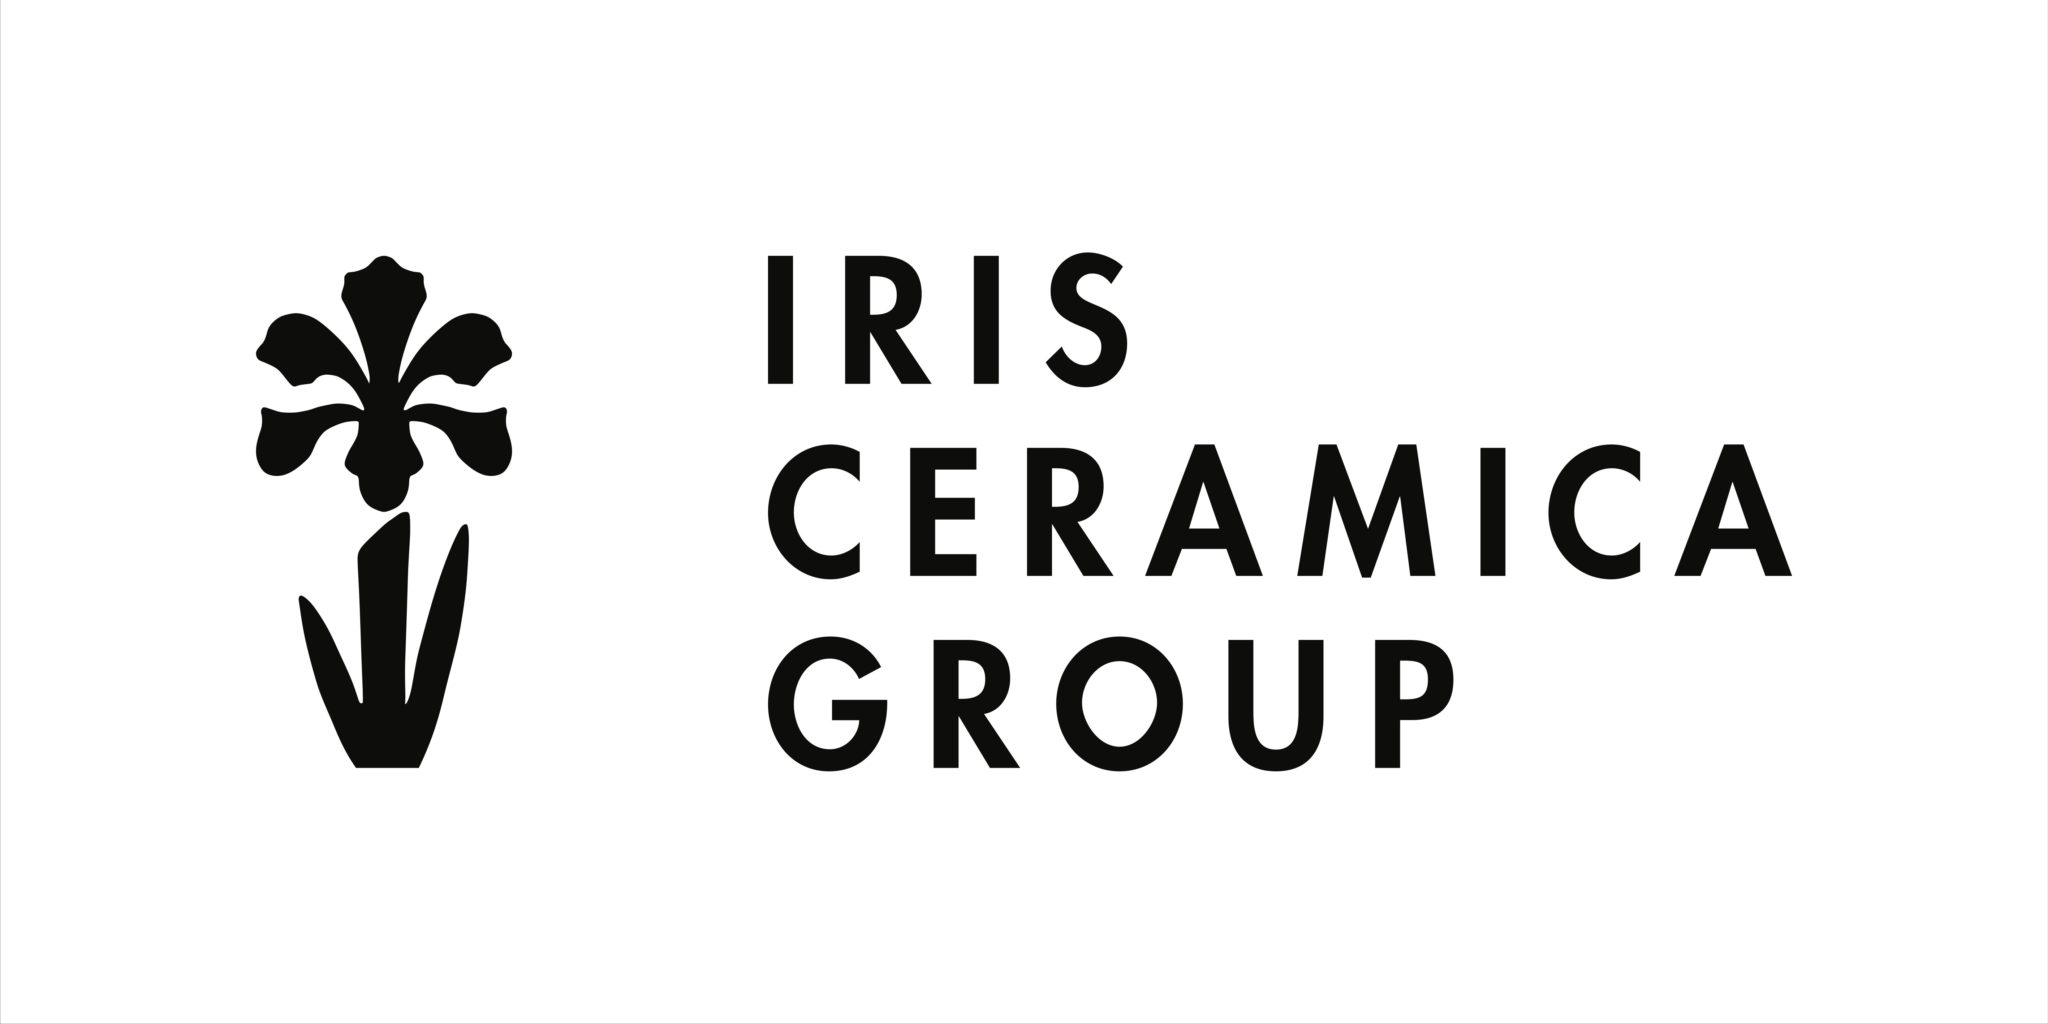 Iris Ceramica Group opens first showroom in the UK